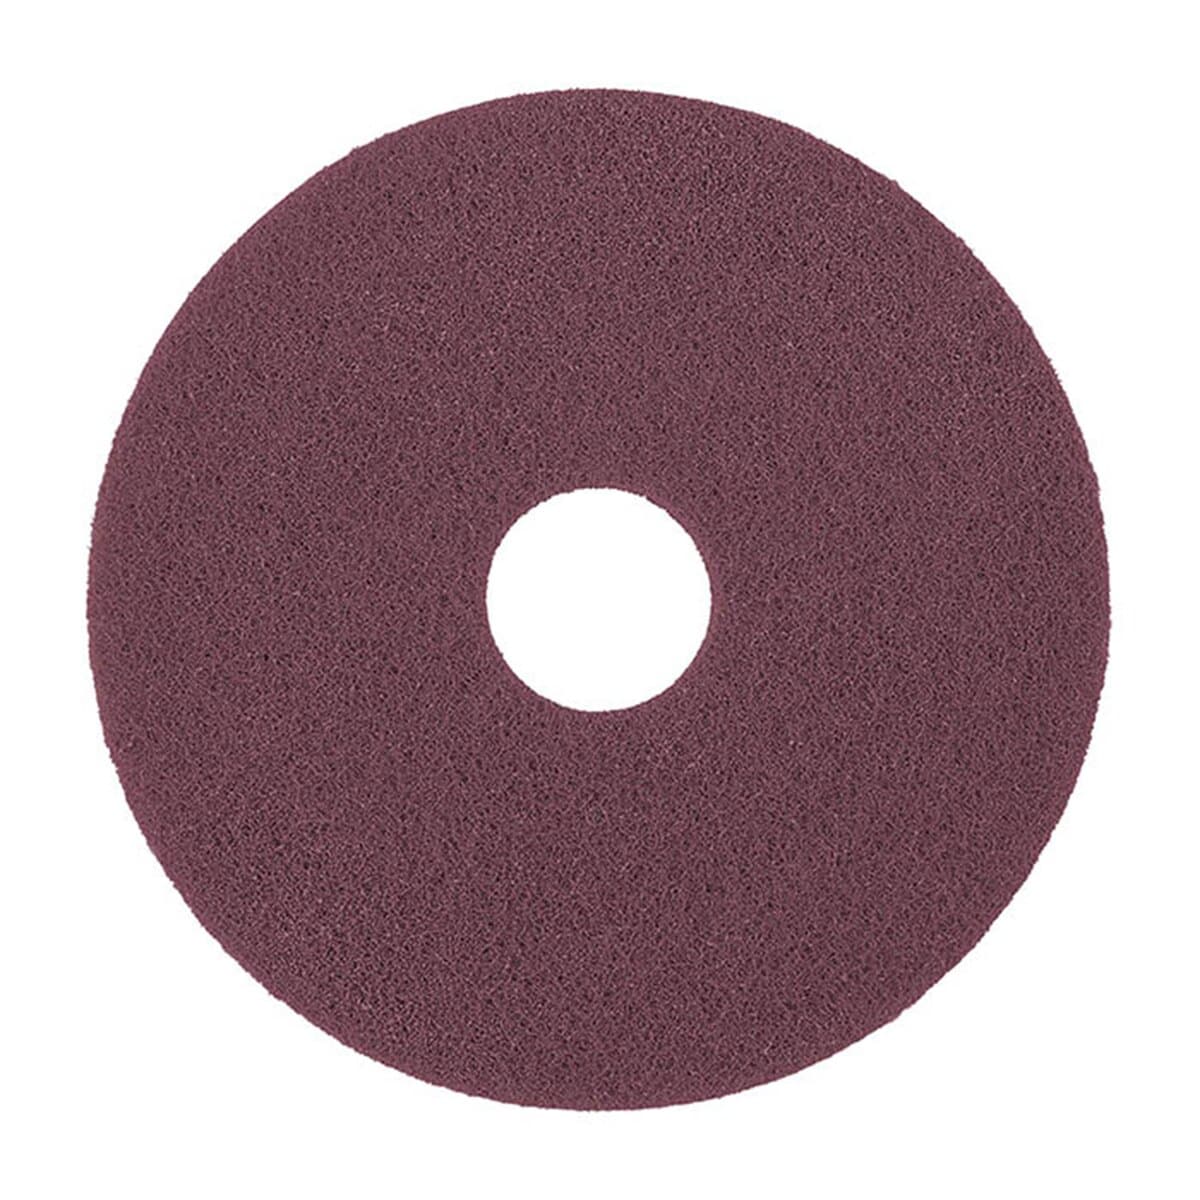 HTC Twister Pads - Purple - Twister Cleaning Technology